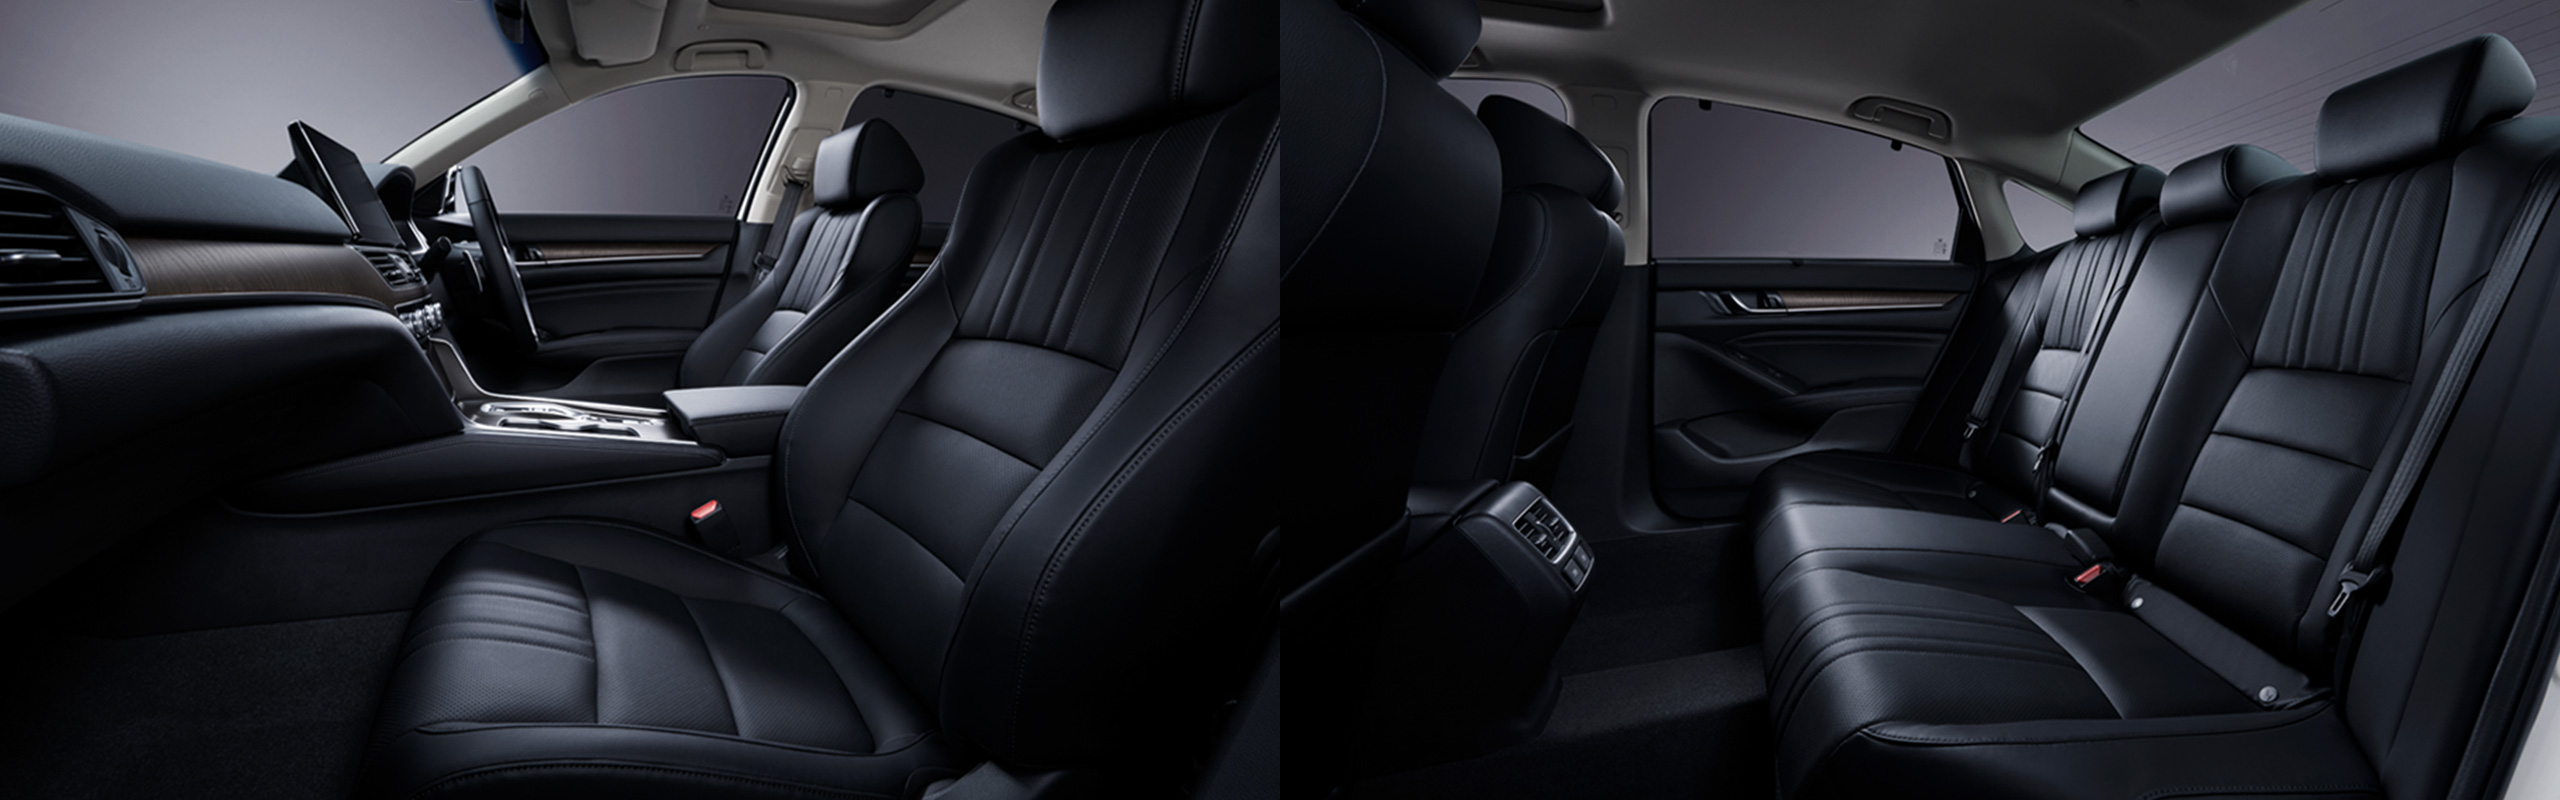 Honda Accord Fill the space for people with comfort.